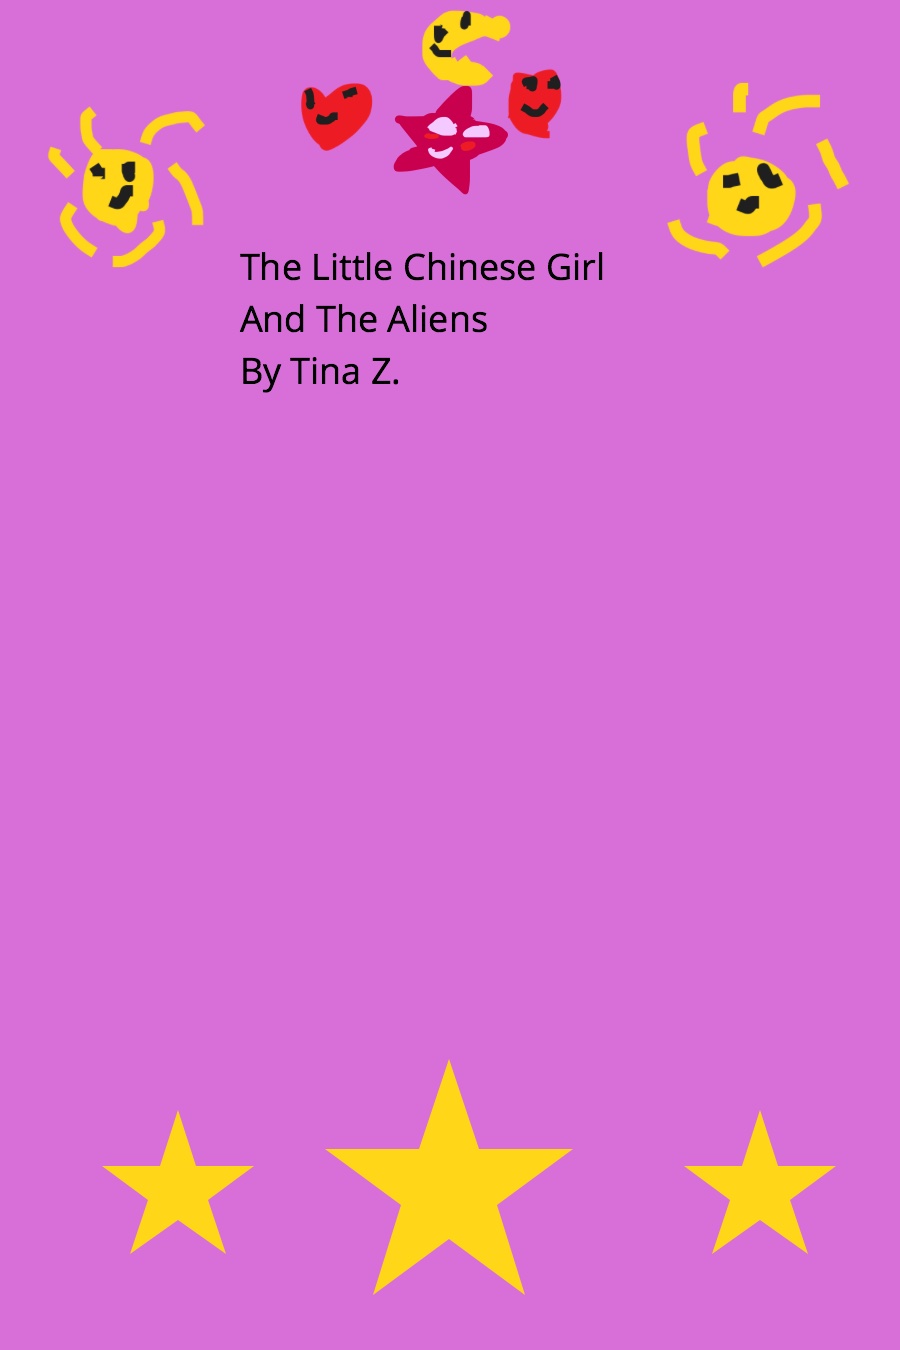 The Little Chinese Person And The Aliens by Tina Z